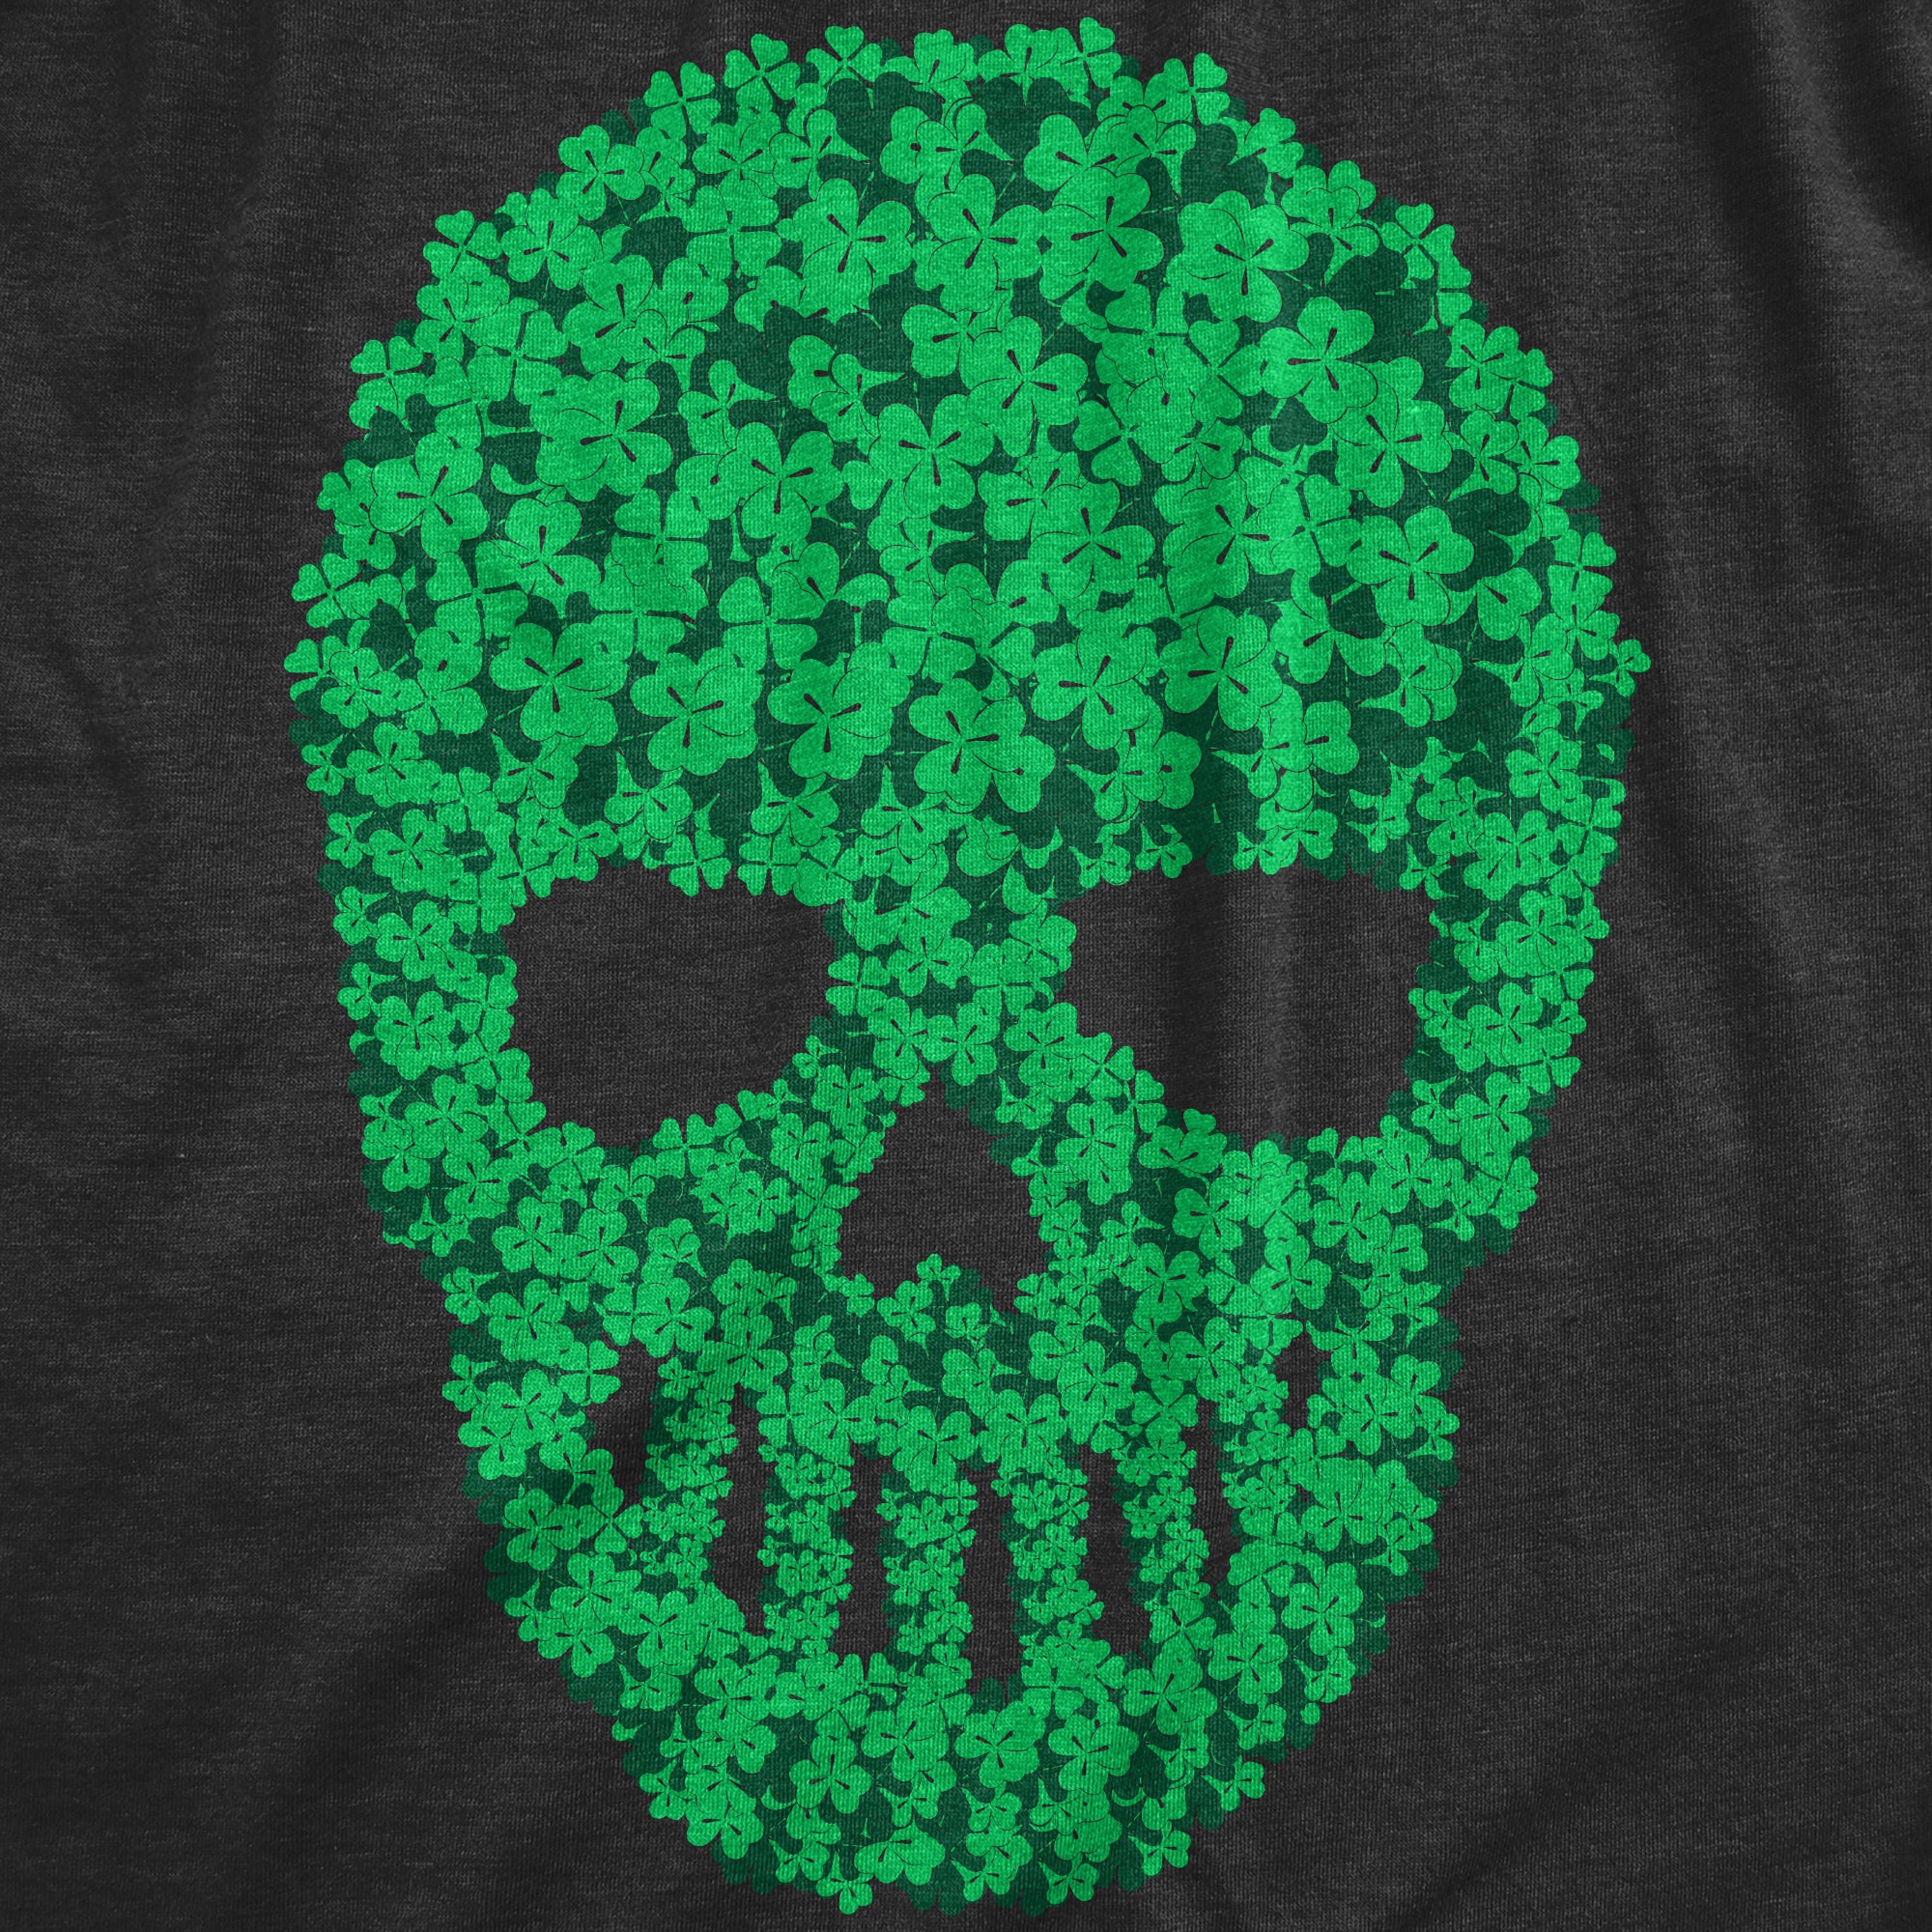 Funny Heather Black - Skull Of Clovers Skull Of Clovers Womens T Shirt Nerdy Saint Patrick's Day Sarcastic Tee